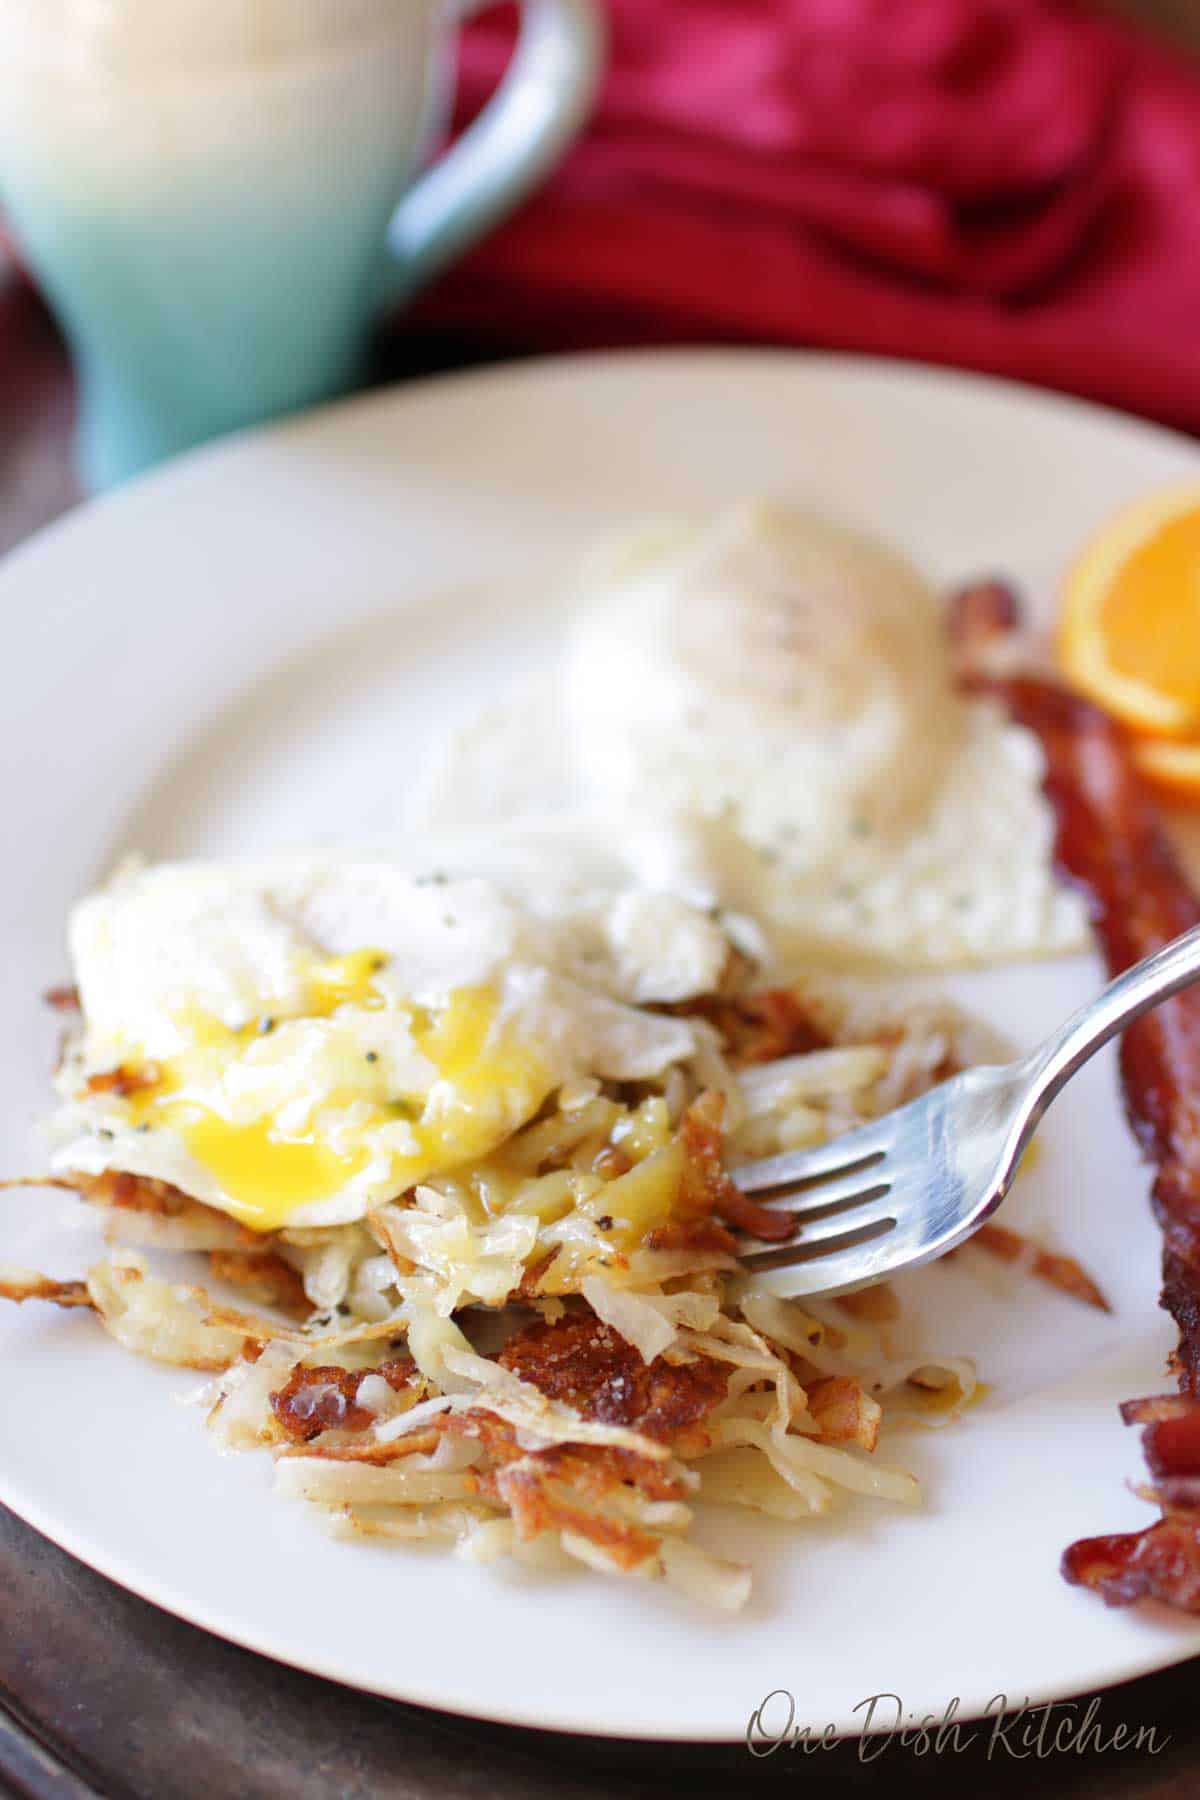 A forkful of hash browns and runny eggs from a plate with slices of bacon and orange slices.